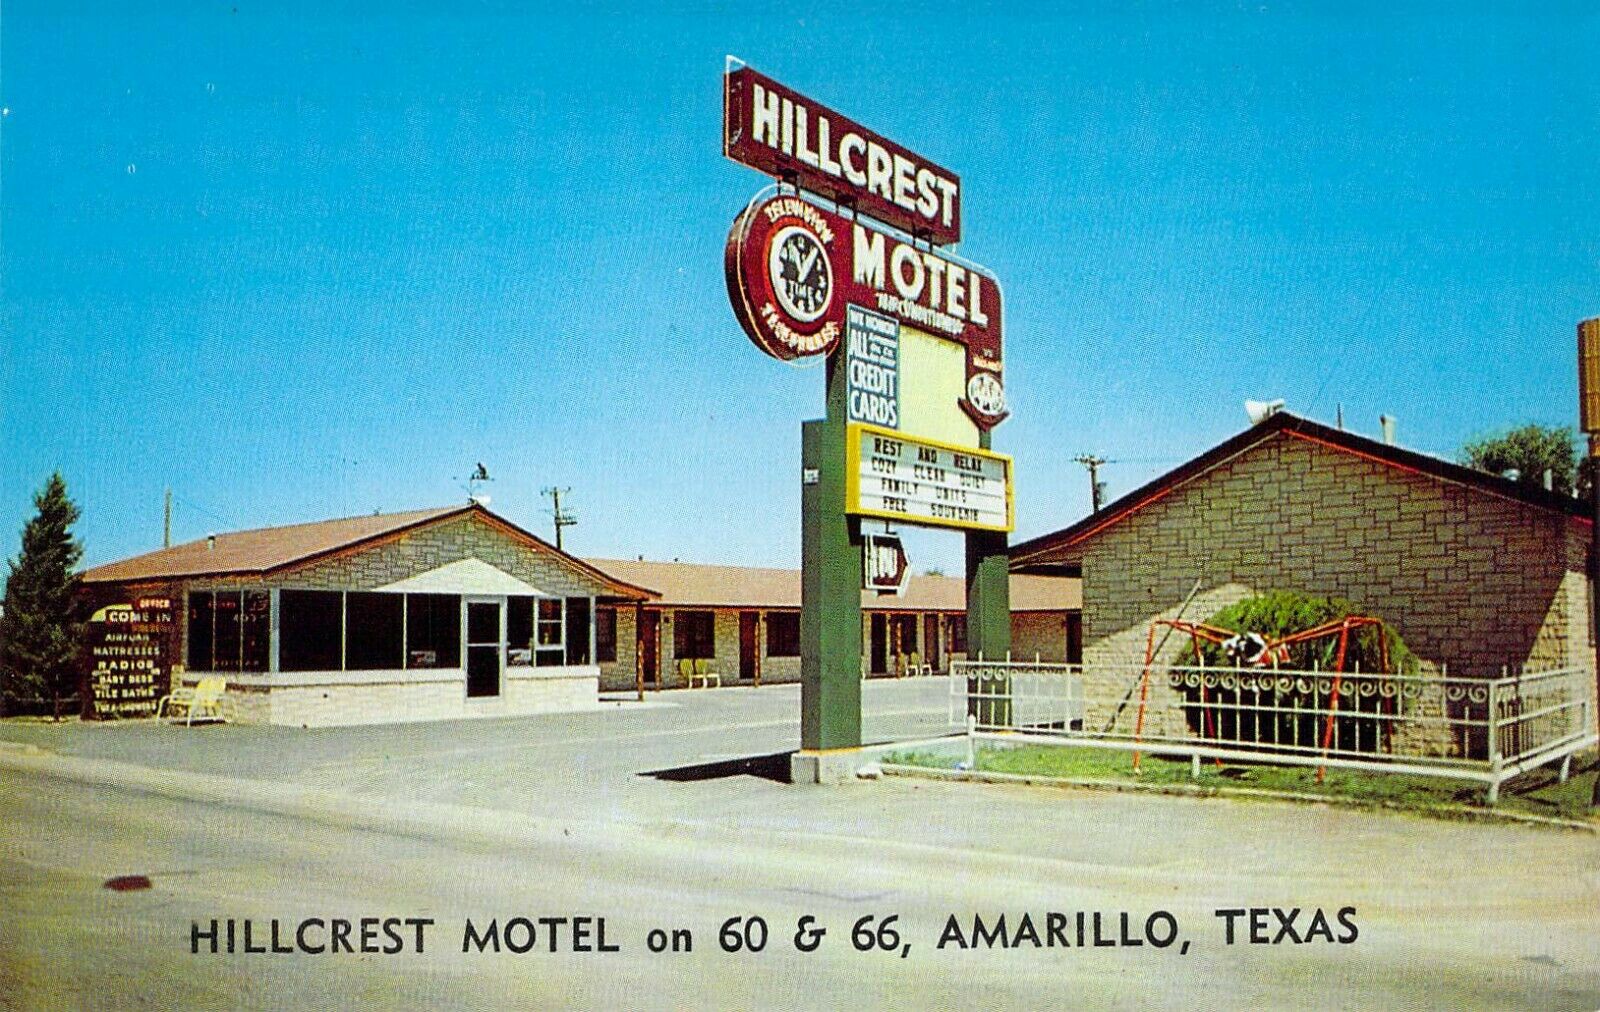 1959 Tx Amarillo Hillcrest Motel Great Sign Hwy Route 66  Postcard A66-1